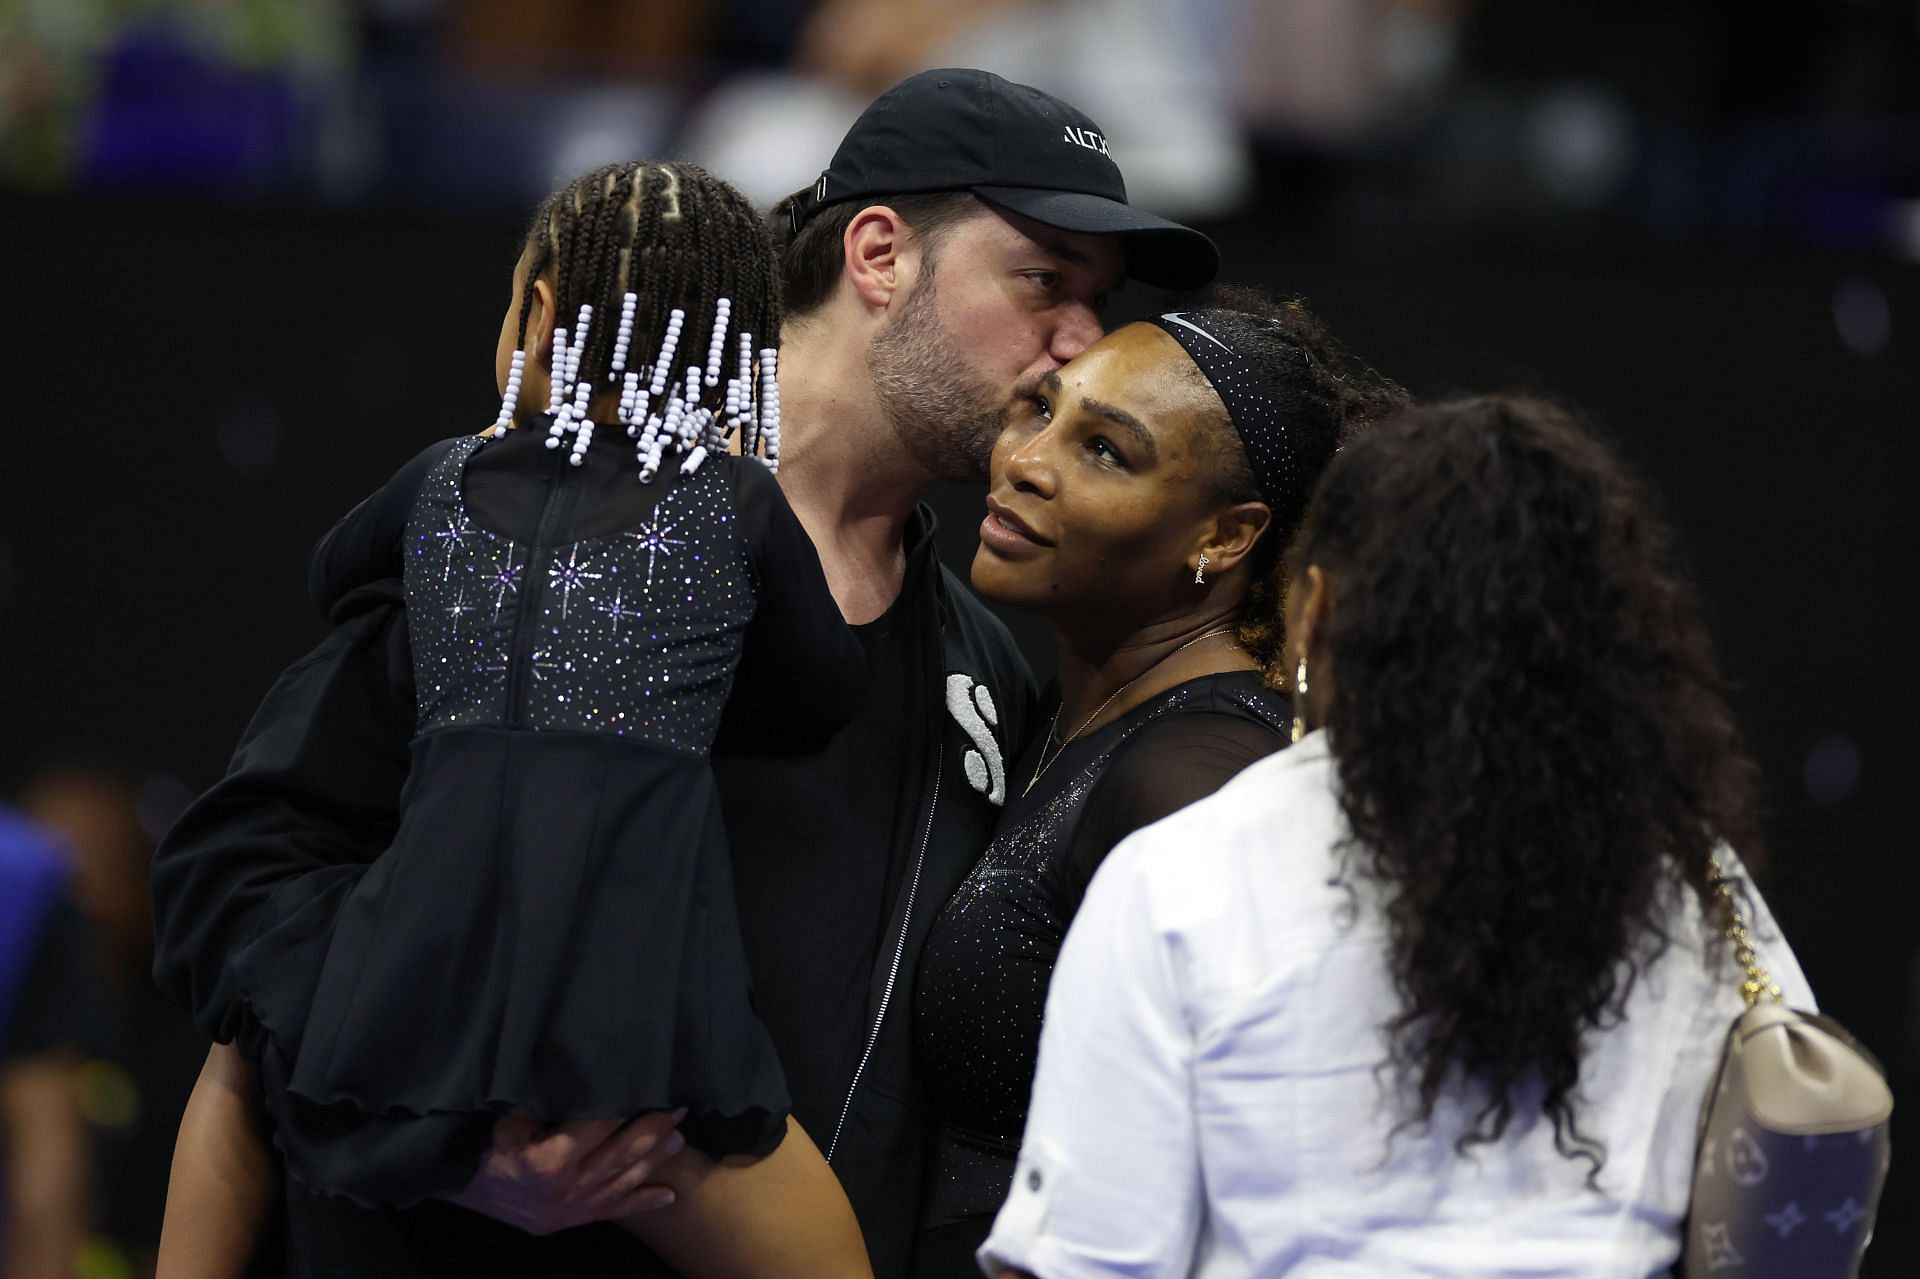 Alexis Ohanian, Serena Williams and their daughter at the 2022 US Open